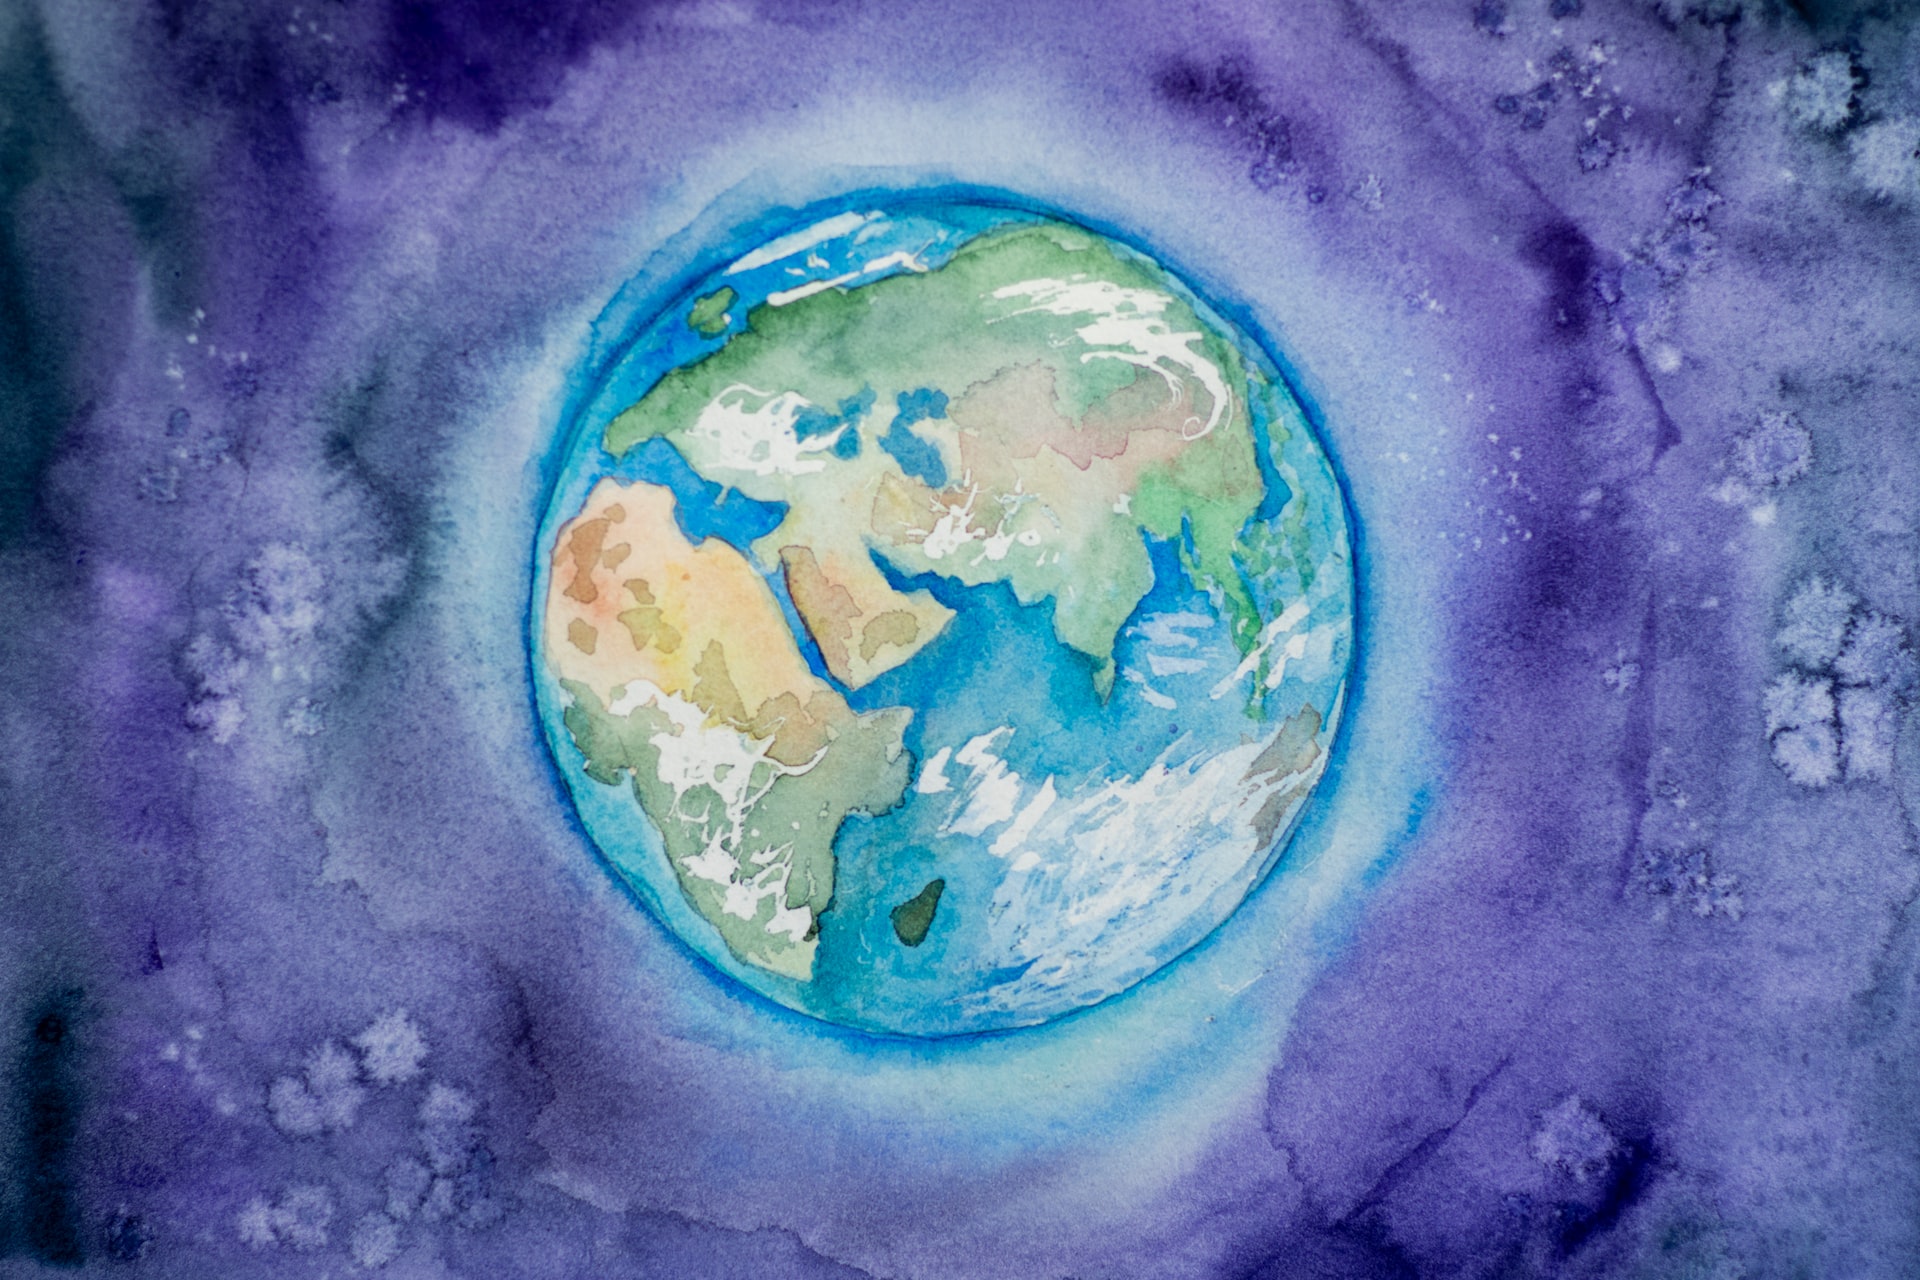 Watercolor illustration of planet earth